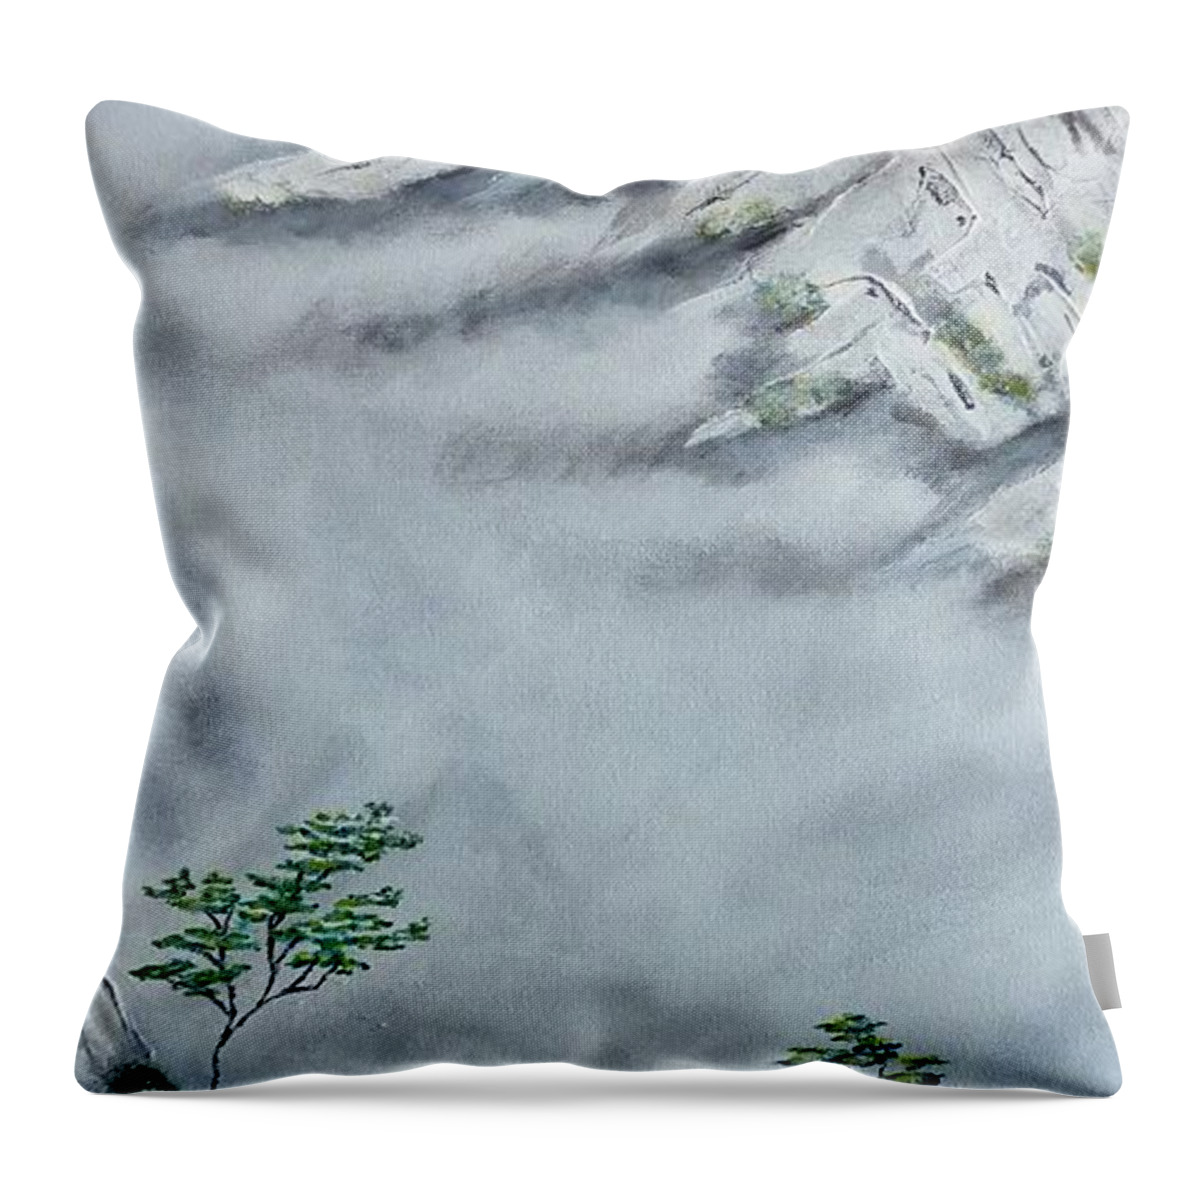 Morning Mist Throw Pillow featuring the painting Morning Mist 2 by Amelie Simmons